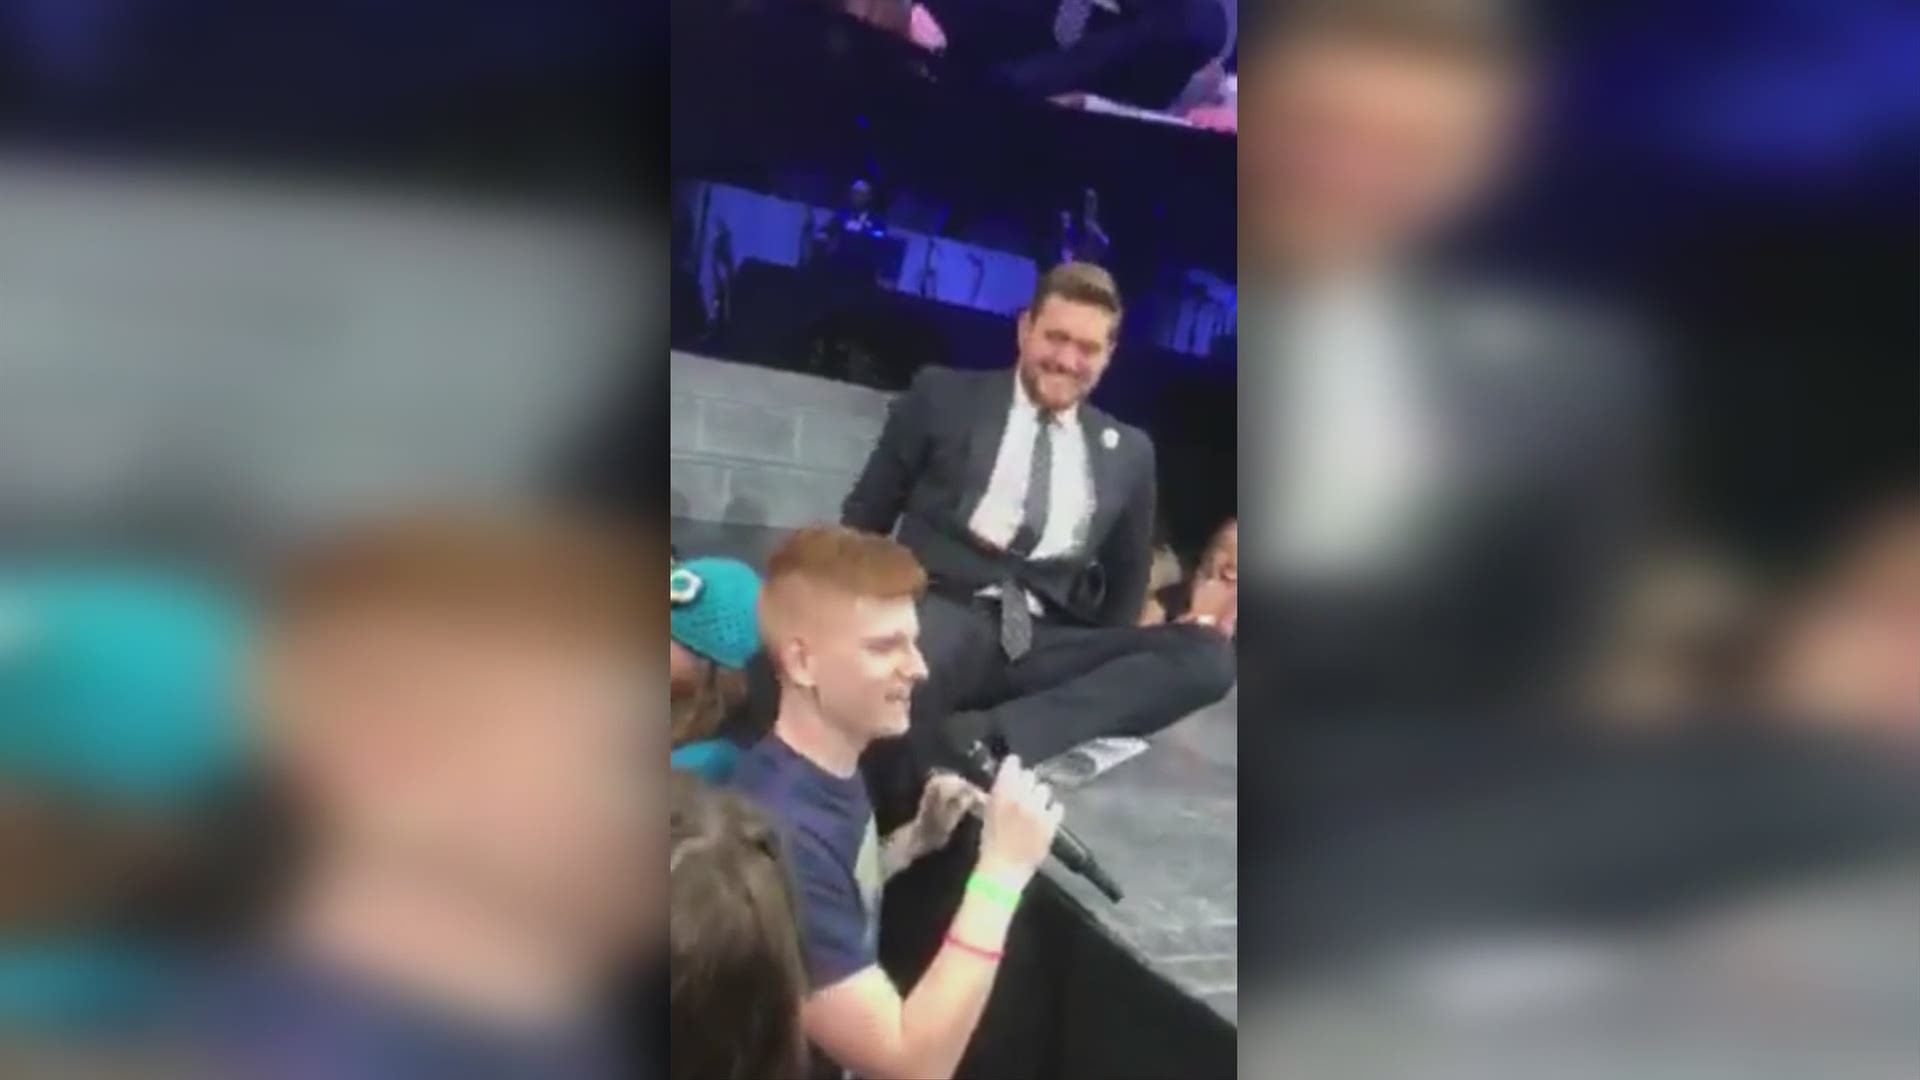 Aberdeen teen Ben Fagerstedt belts out surprise performance at Michael Buble concert at the Tacoma Dome.